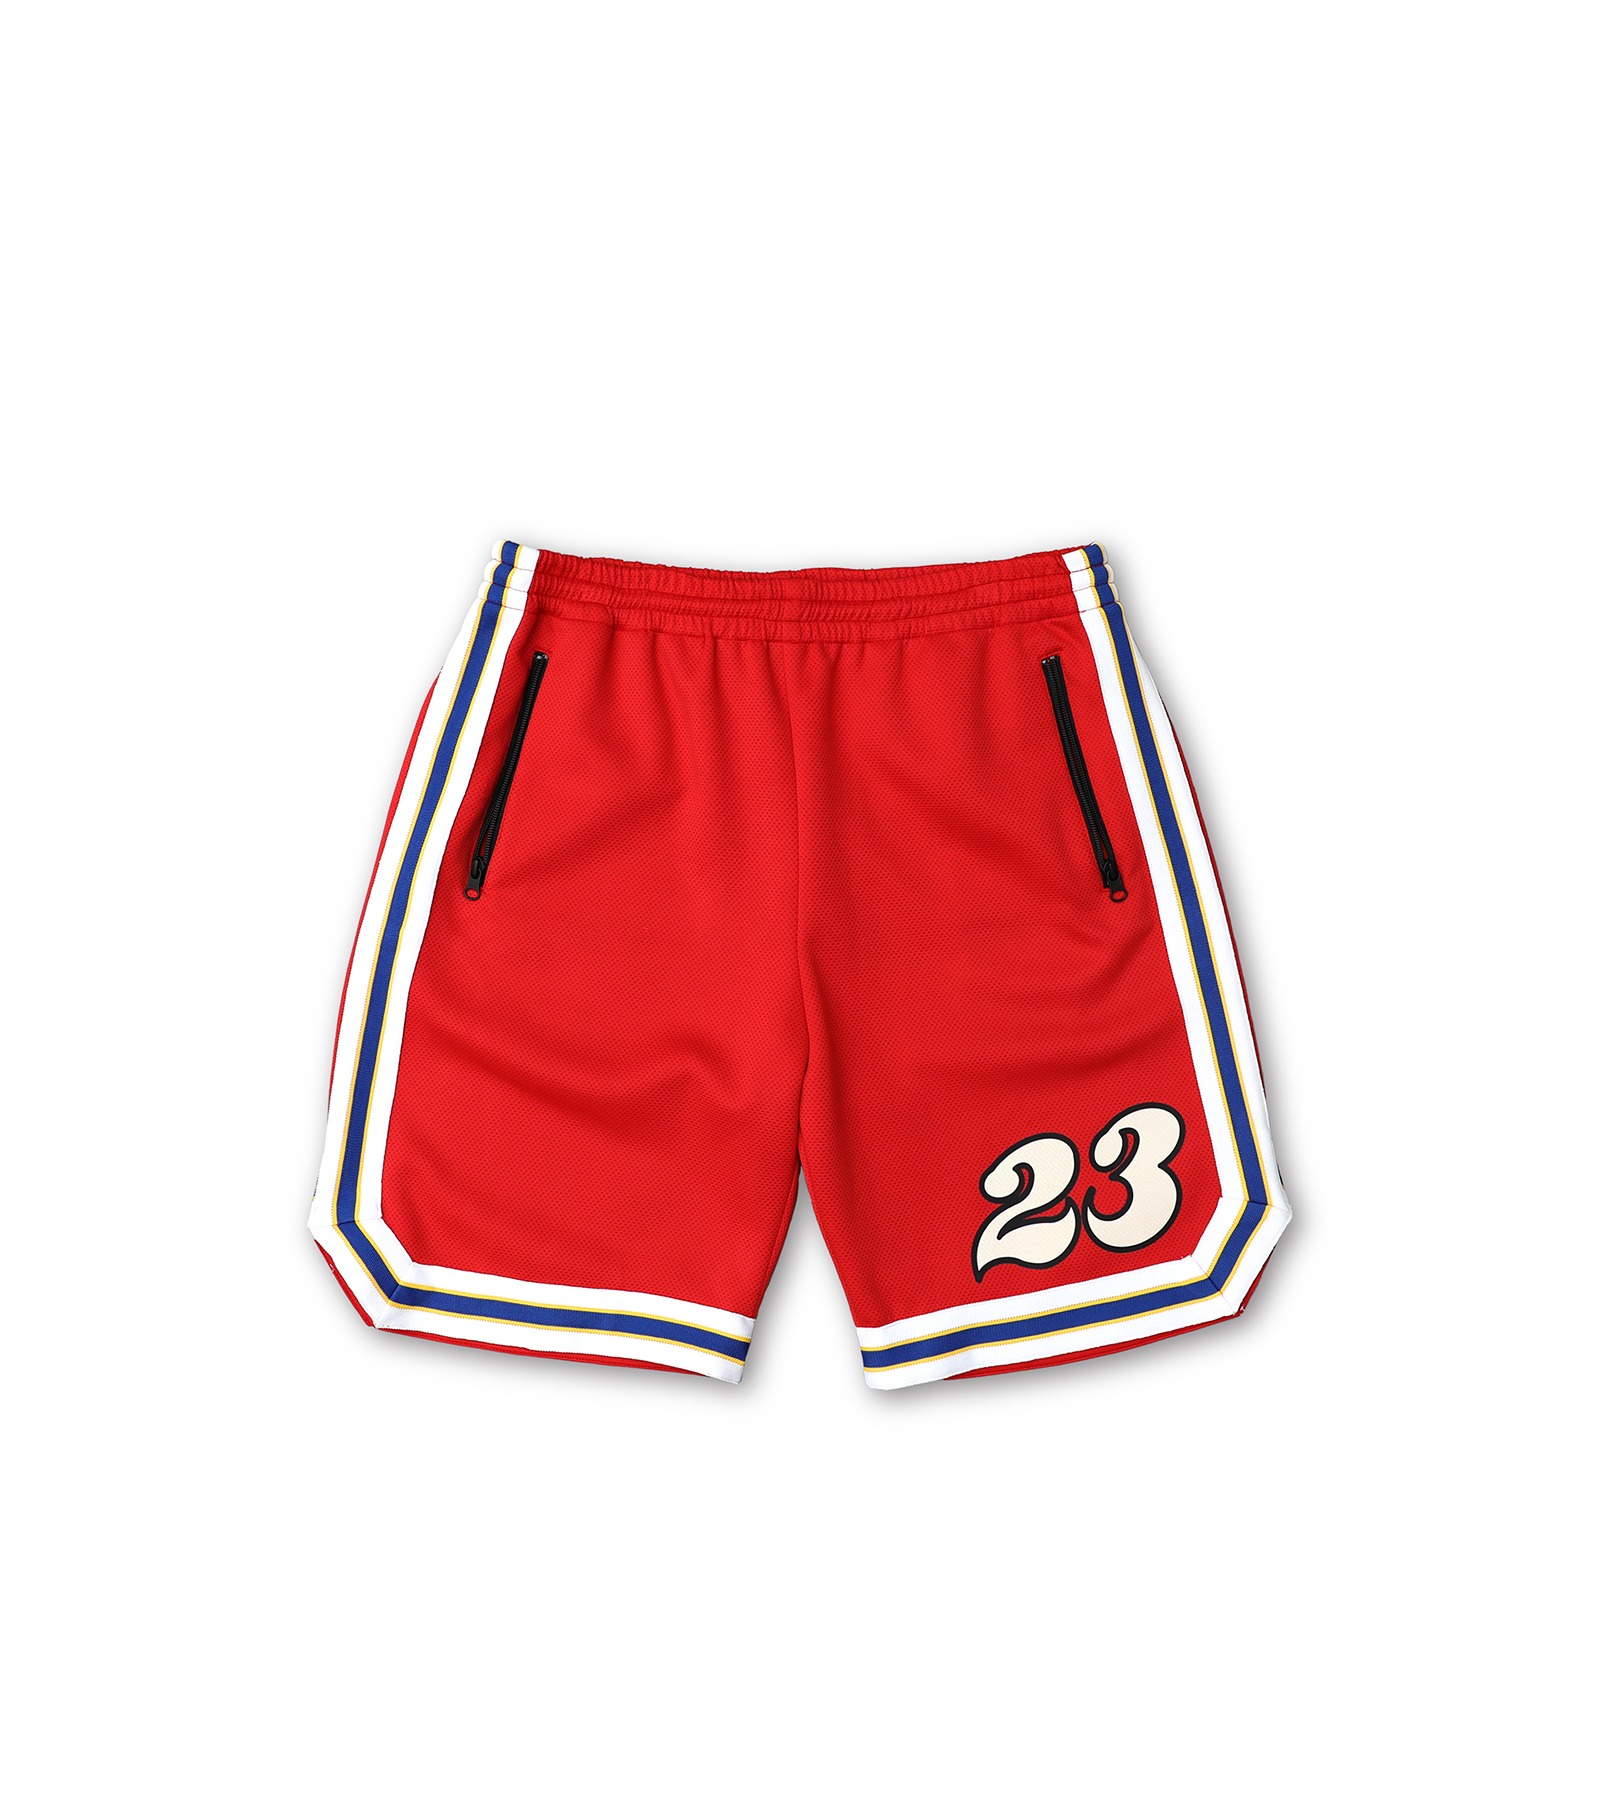 Goat Game Short (Red)